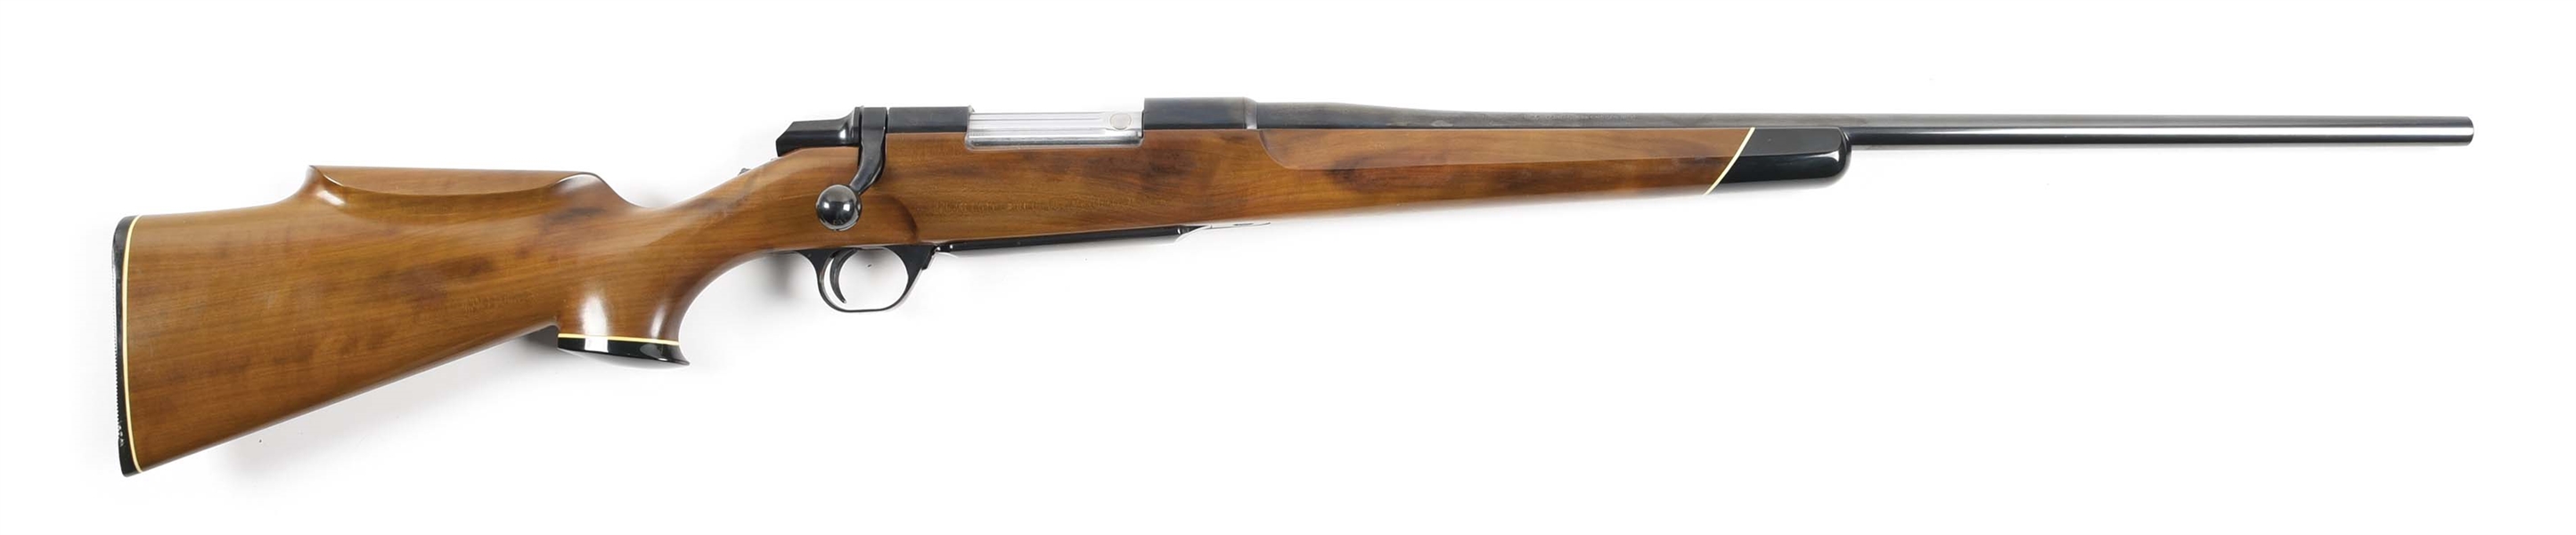 (M) BROWNING BBR BOLT ACTION RIFLE WITH CONGO WOOD STOCK.